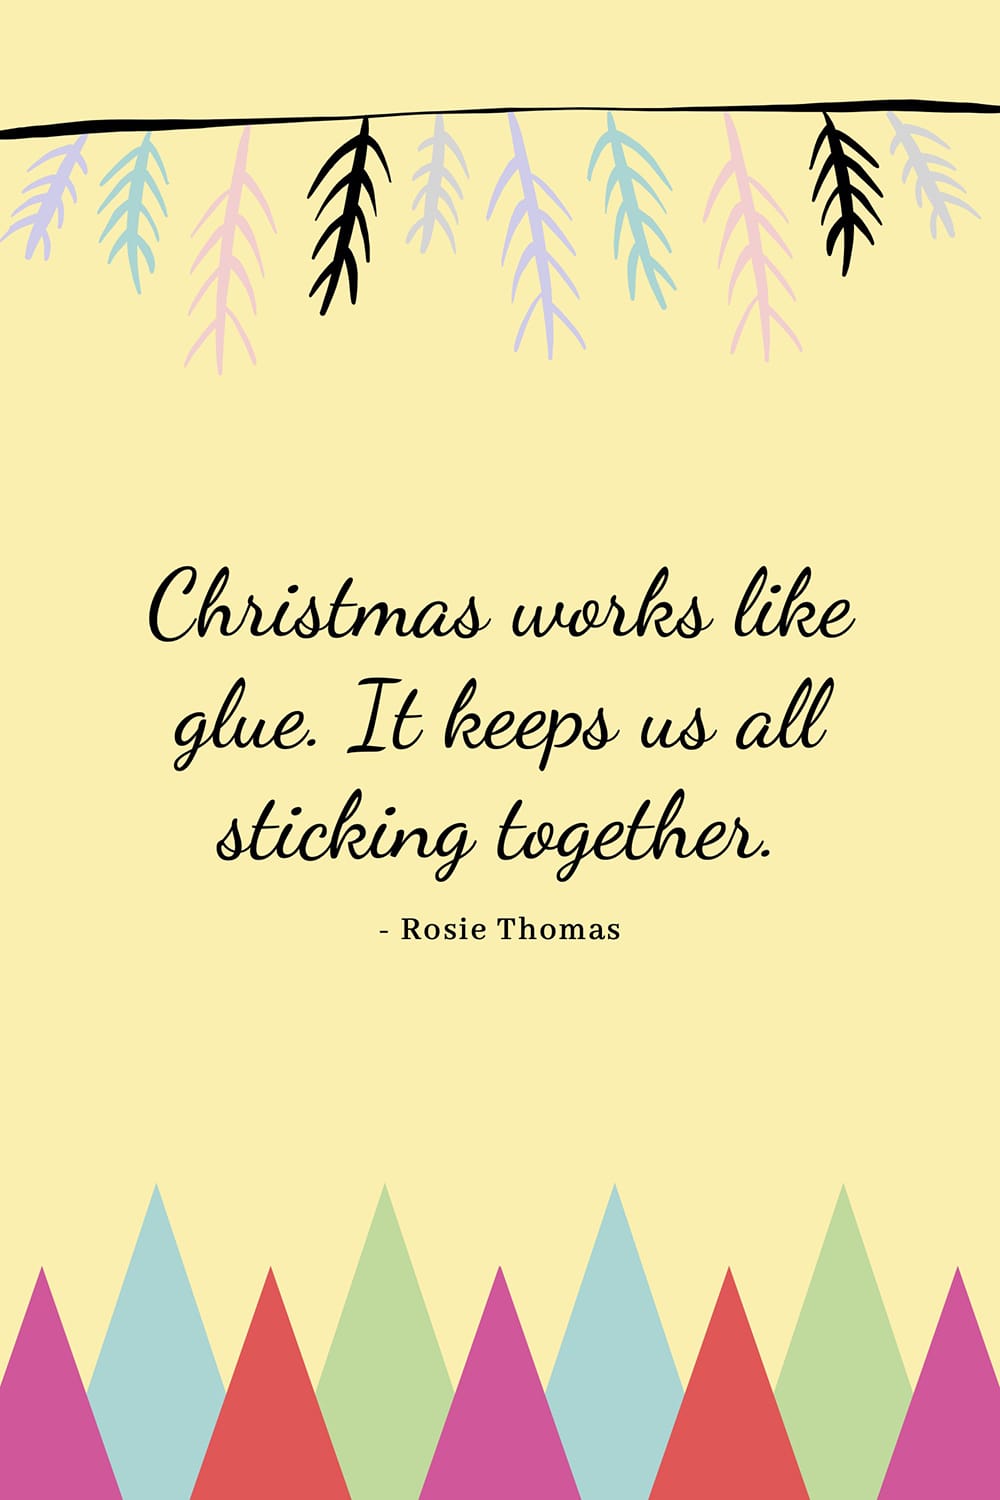 Best short Christmas quotes 23